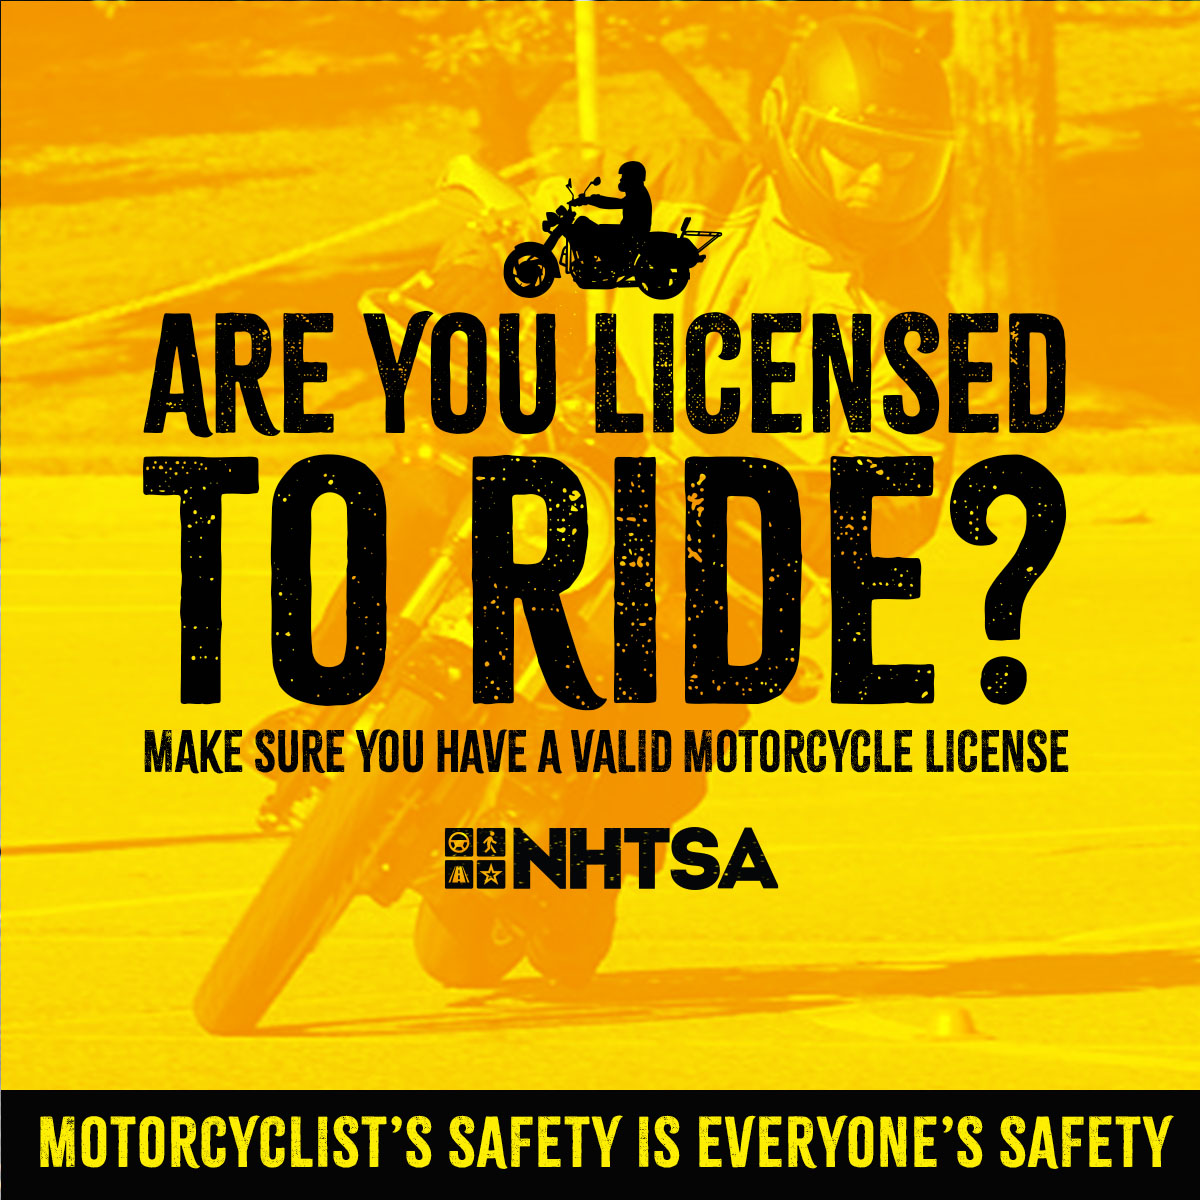 Are you licensed to Ride?  Make sure you have a valid motorcycle endorsement.  Motorcyclist’s safety is everyone’s safety.